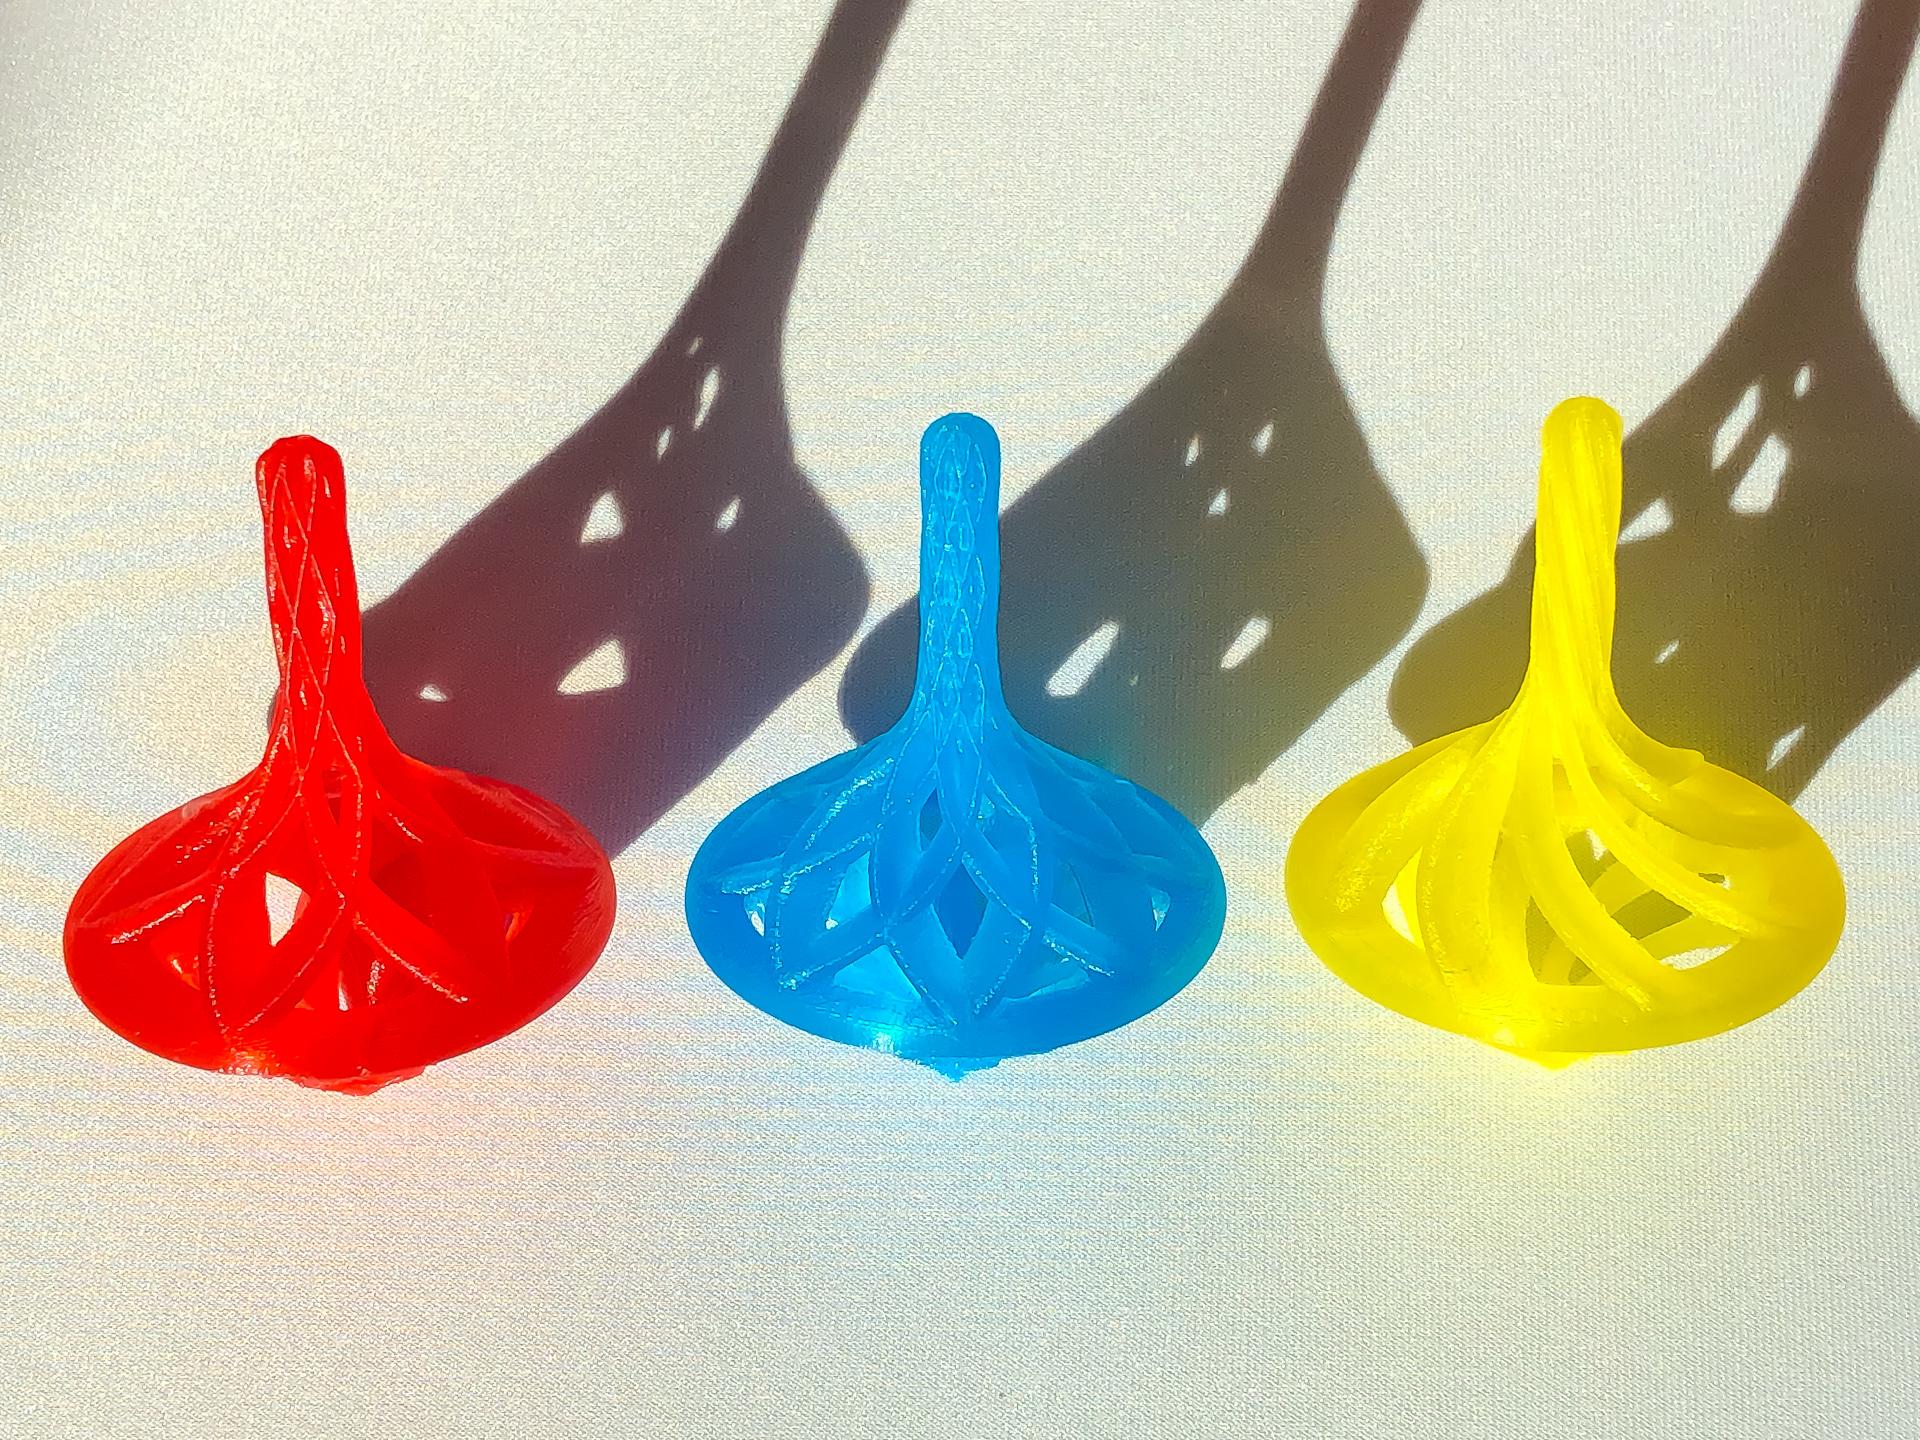 Set of 3 Spinning Tops - All 3 designs printed with Hatchbox colored transparent PLA. - 3d model